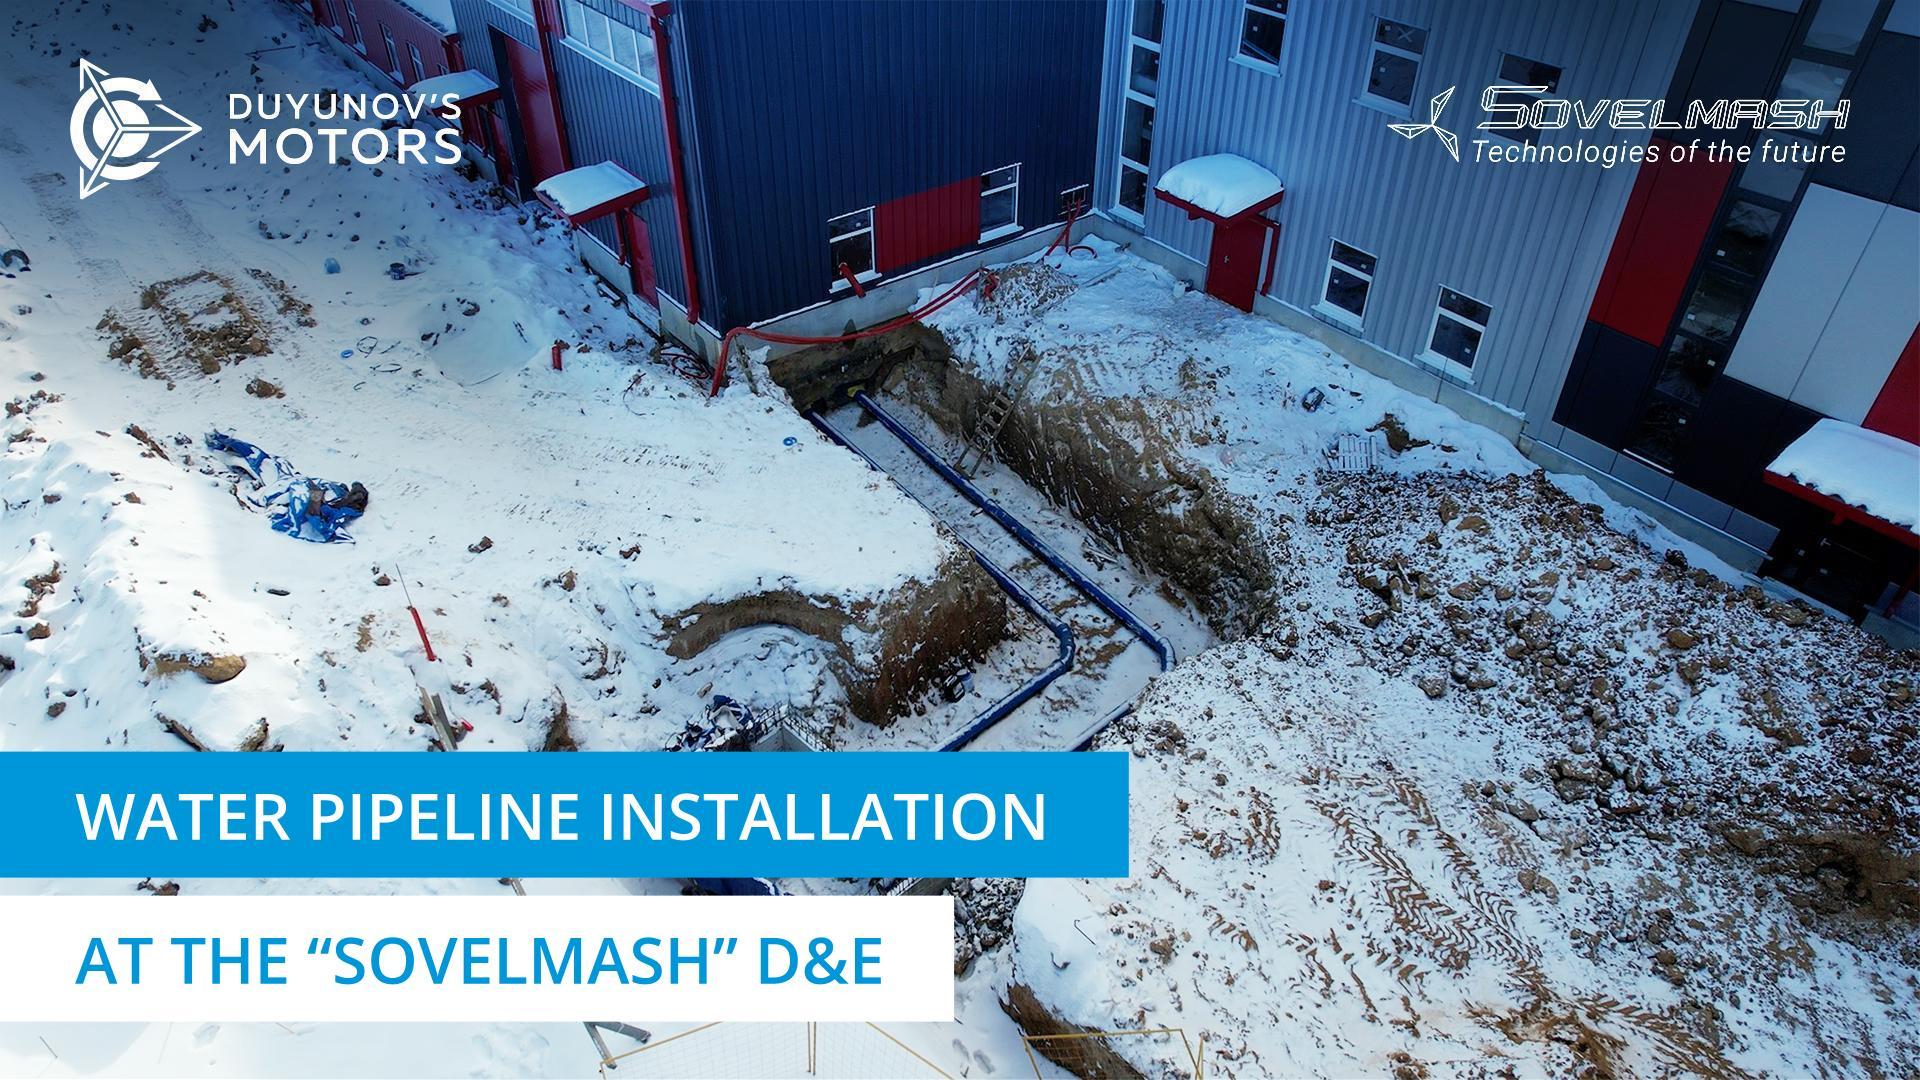 New stage in the "Sovelmash" D&E construction: introducing utilities inside the building